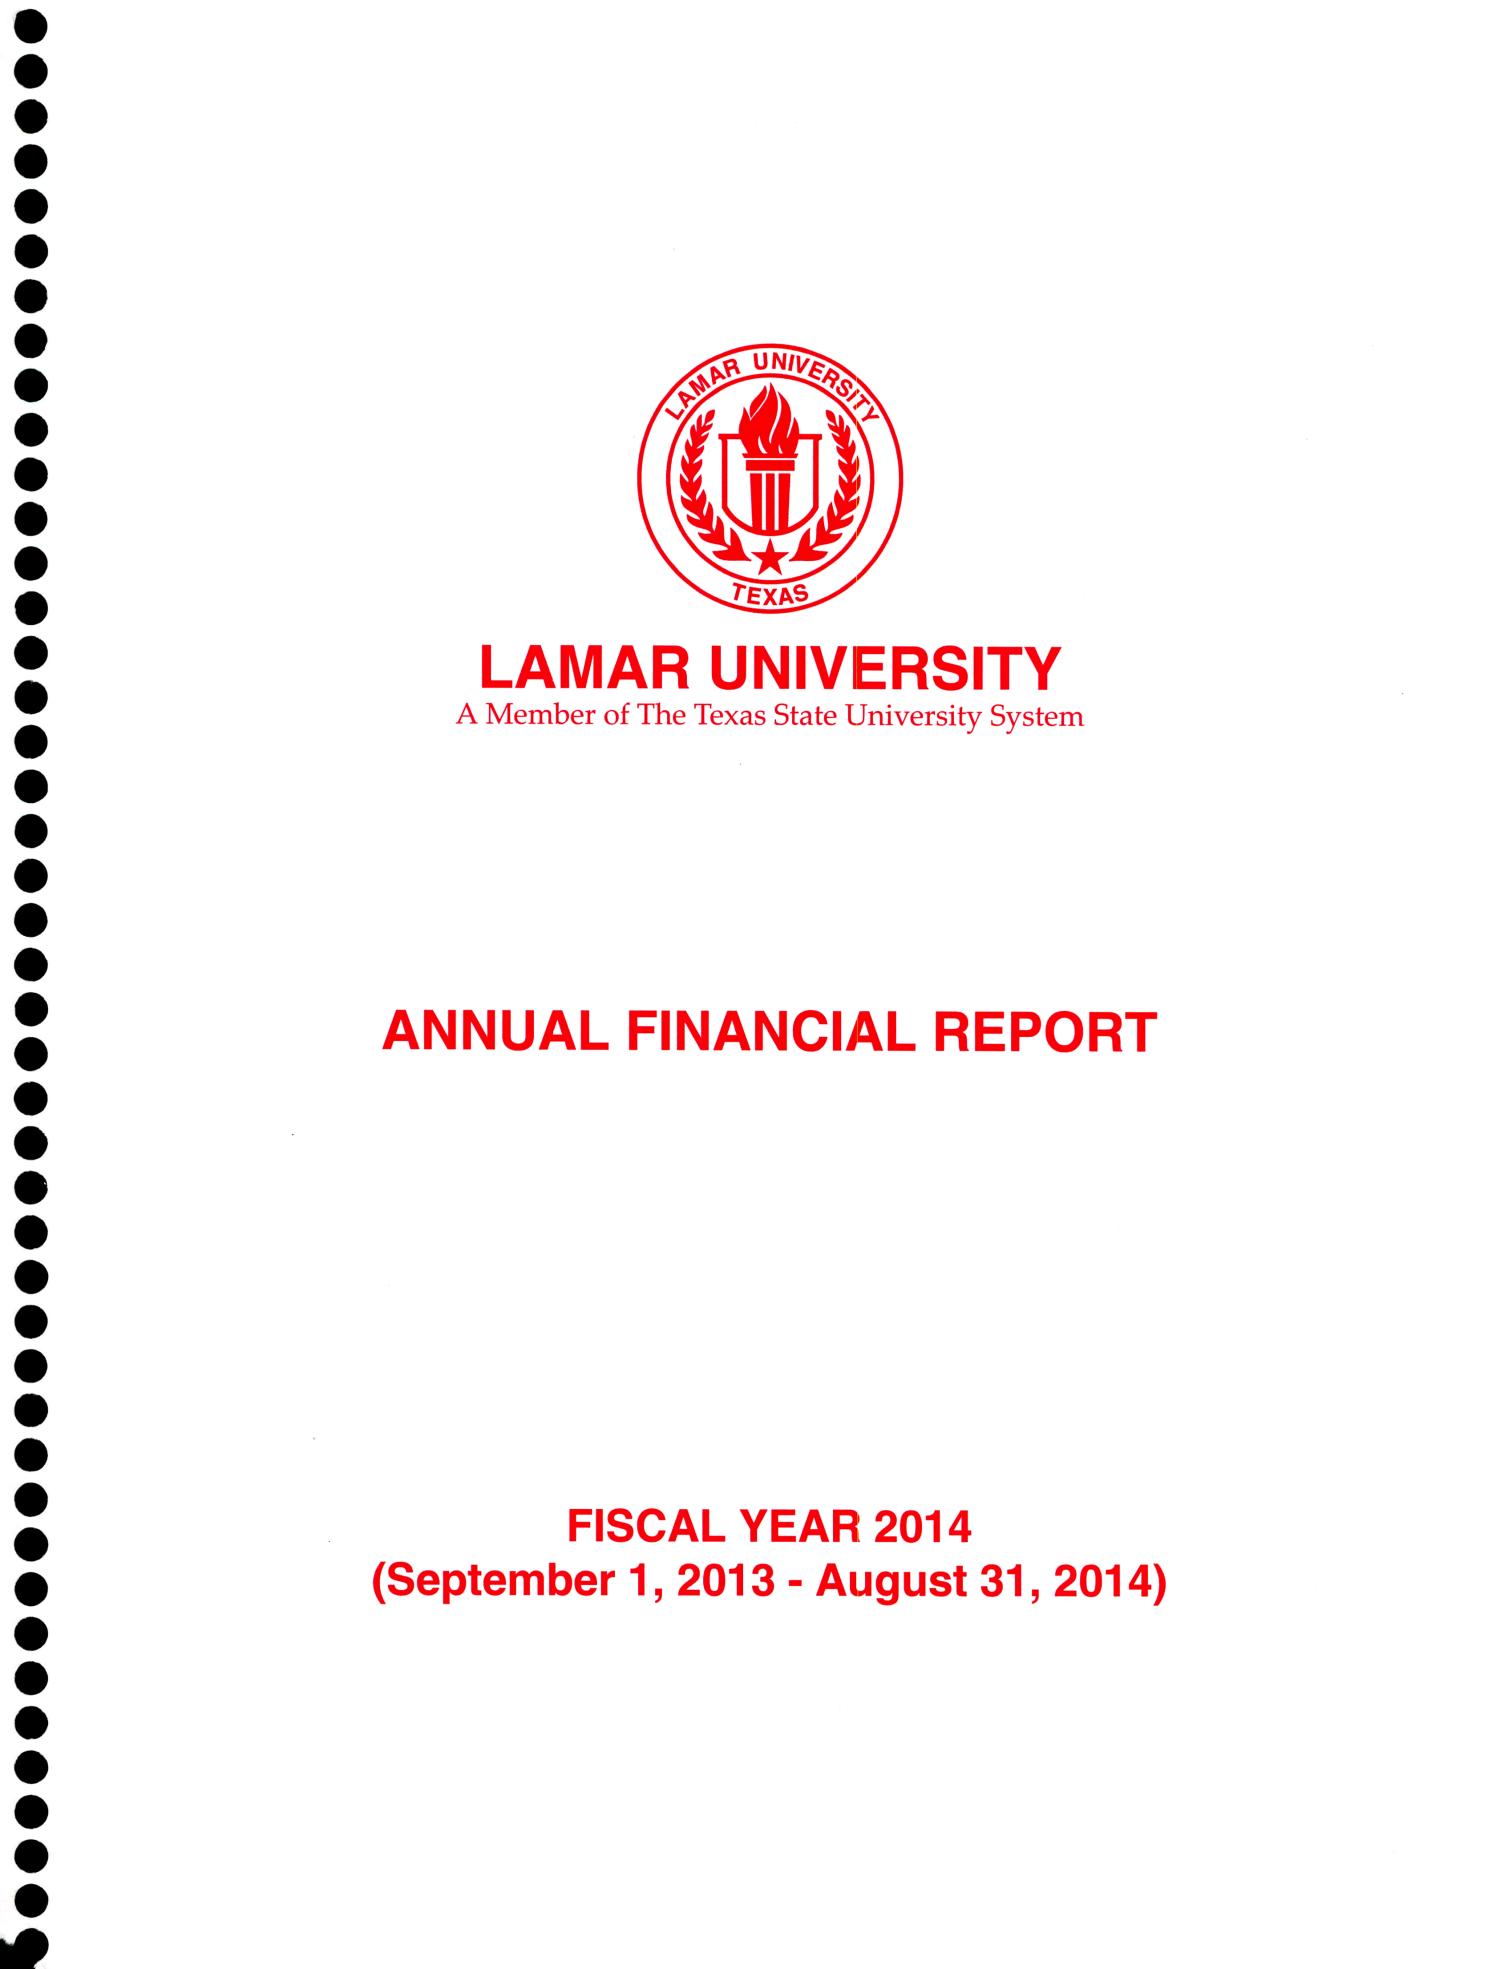 Lamar University Annual Financial Report: 2014
                                                
                                                    Front Cover
                                                